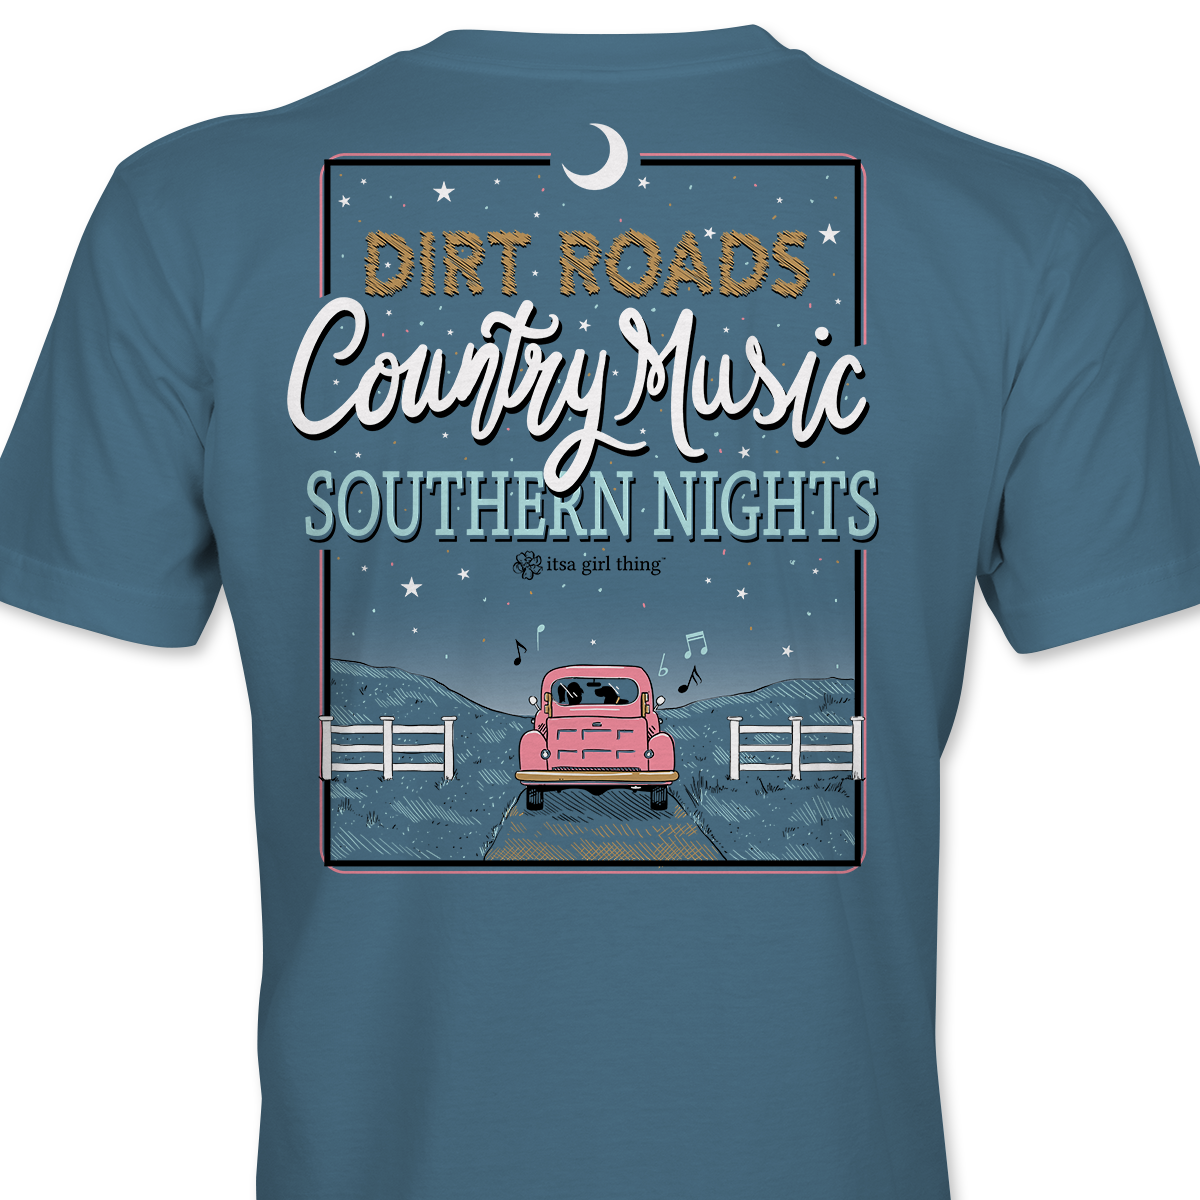 Dirt Roads- Country Music Southern T-Shirt